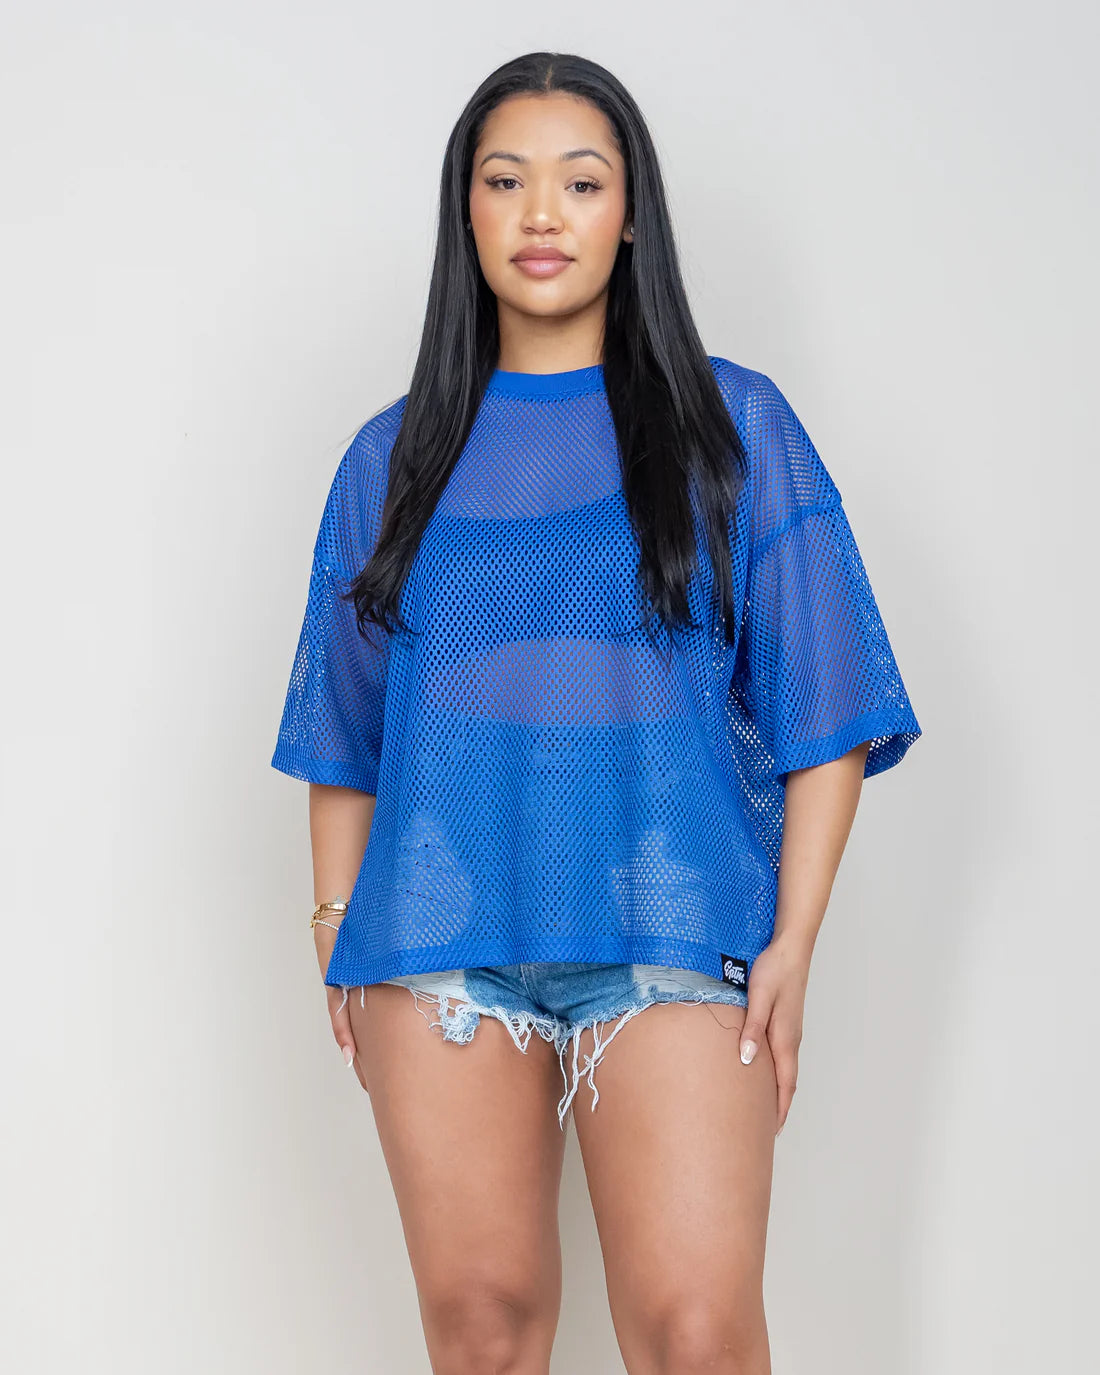 EPTM: STADIUM JERSEY BLUE (front view on female model)